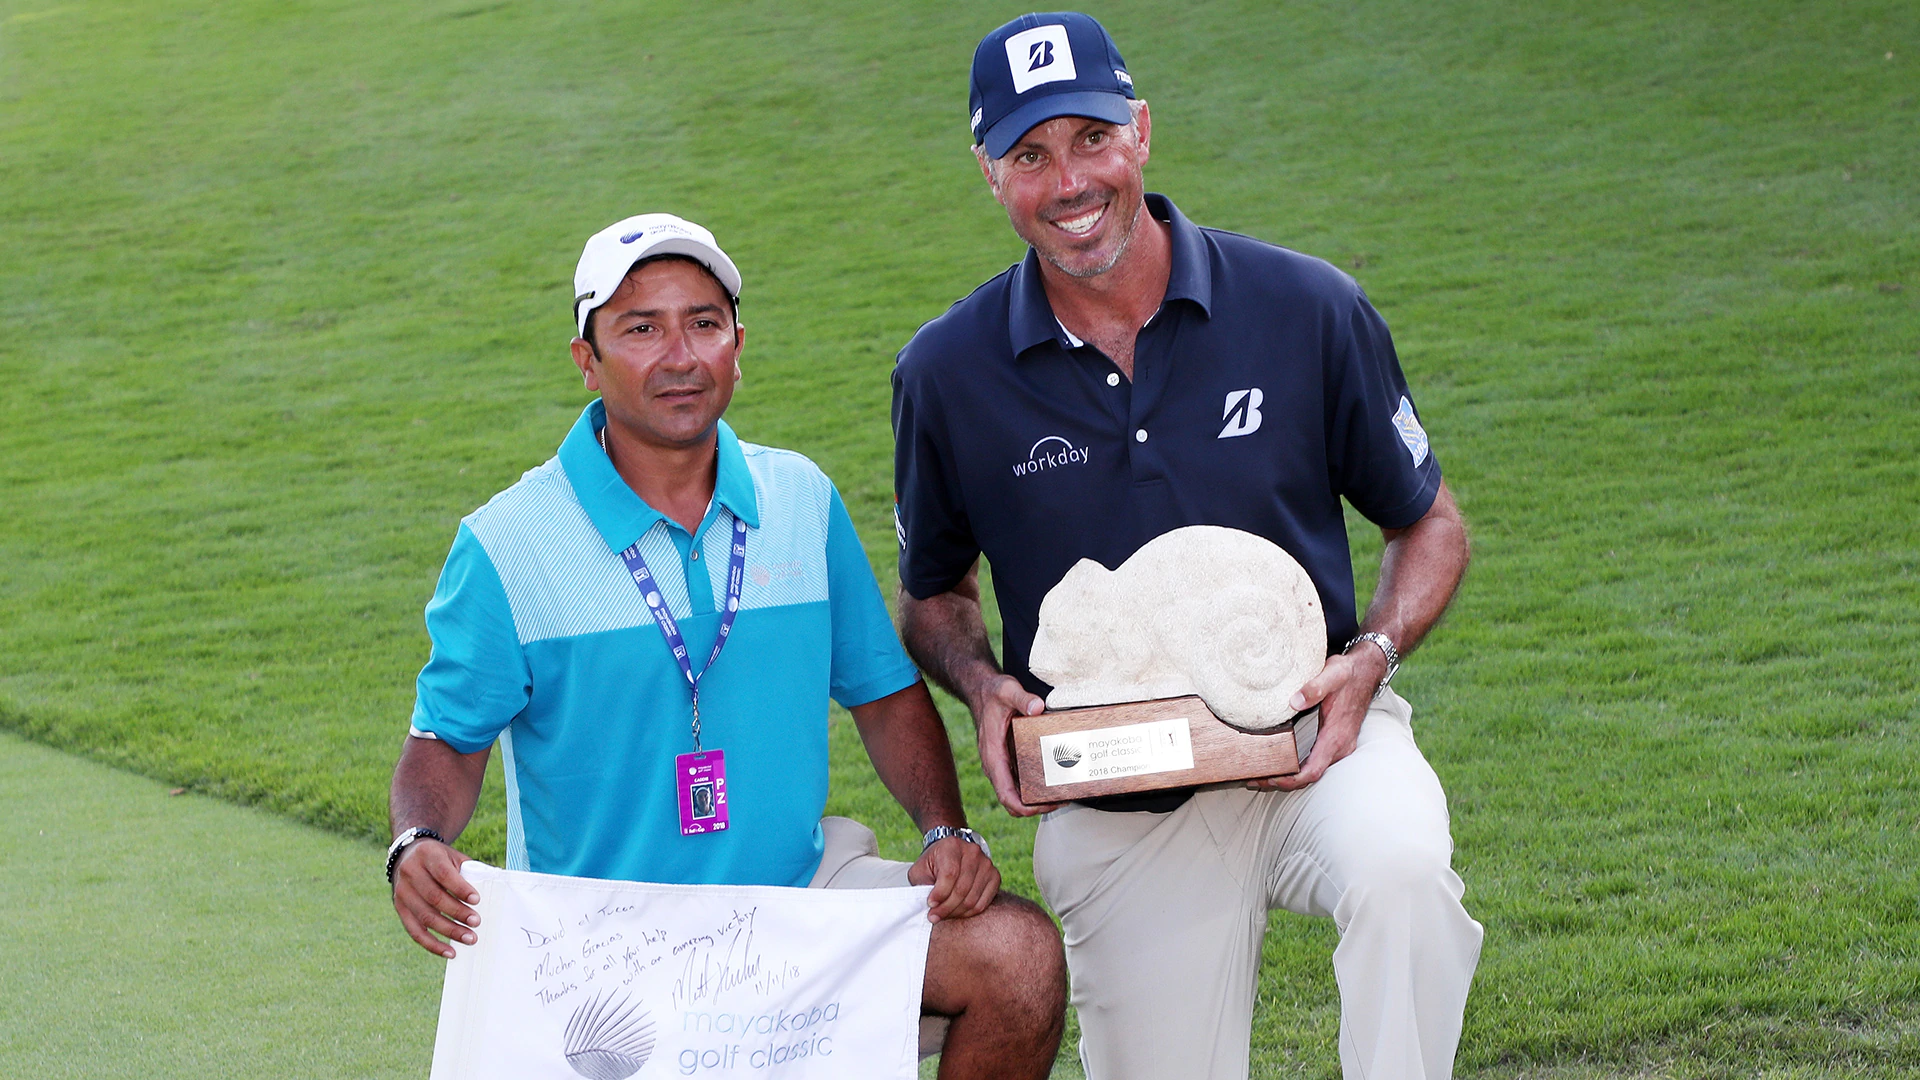 Kuchar defends payment to caddie: 'Making $5,000 is a great week'